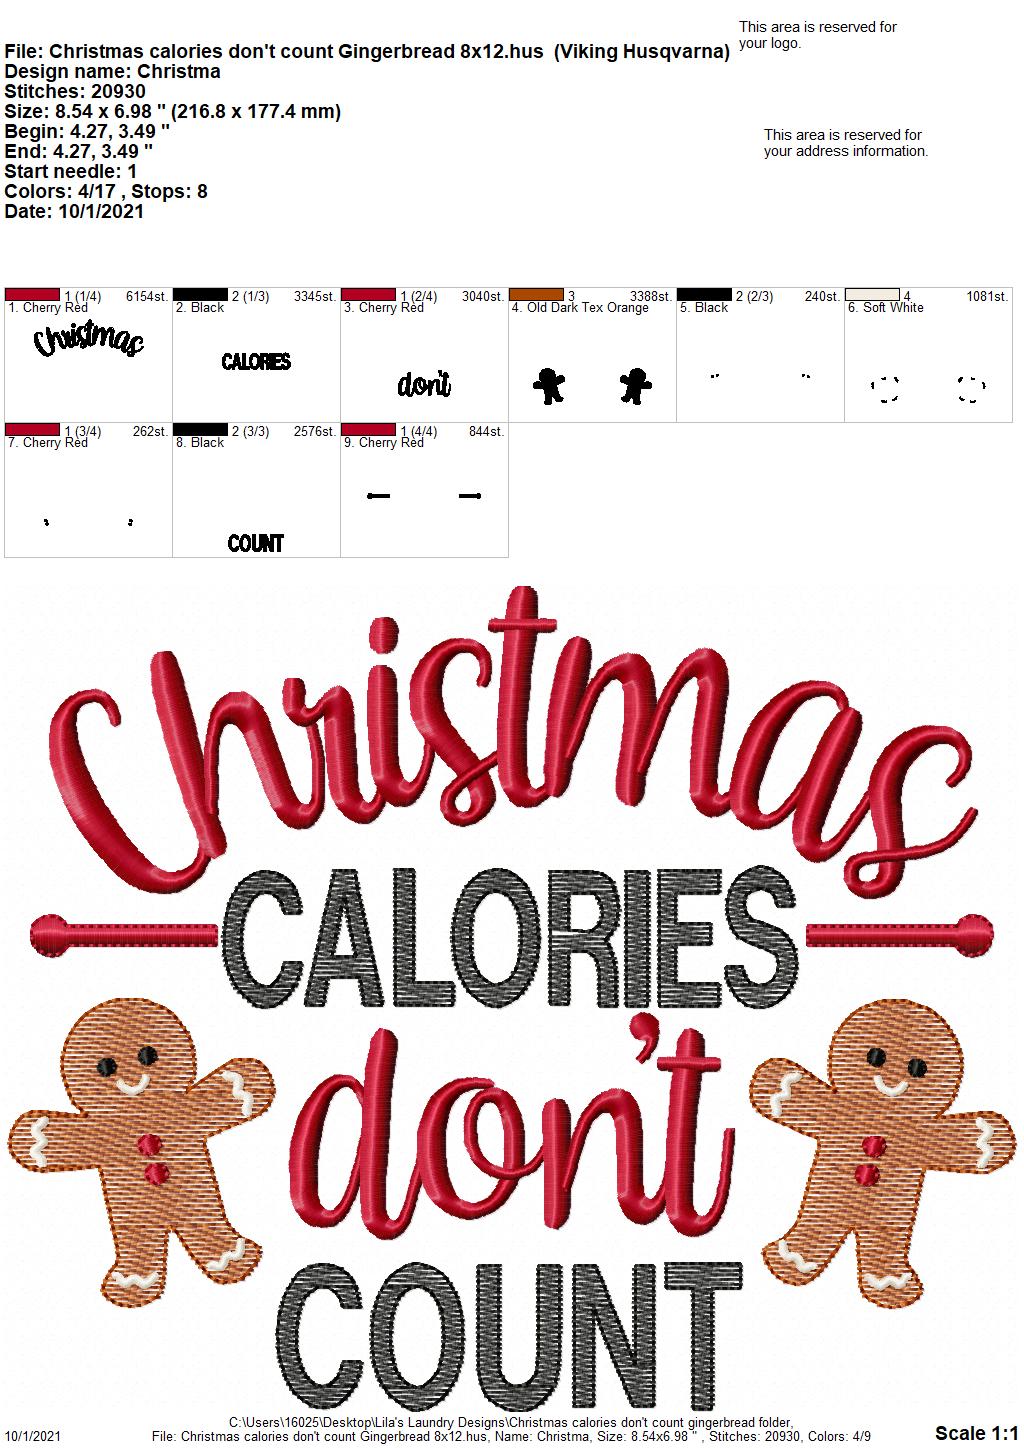 Christmas Calories Don't Count Gingerbread - 3 sizes- Digital Embroidery Design